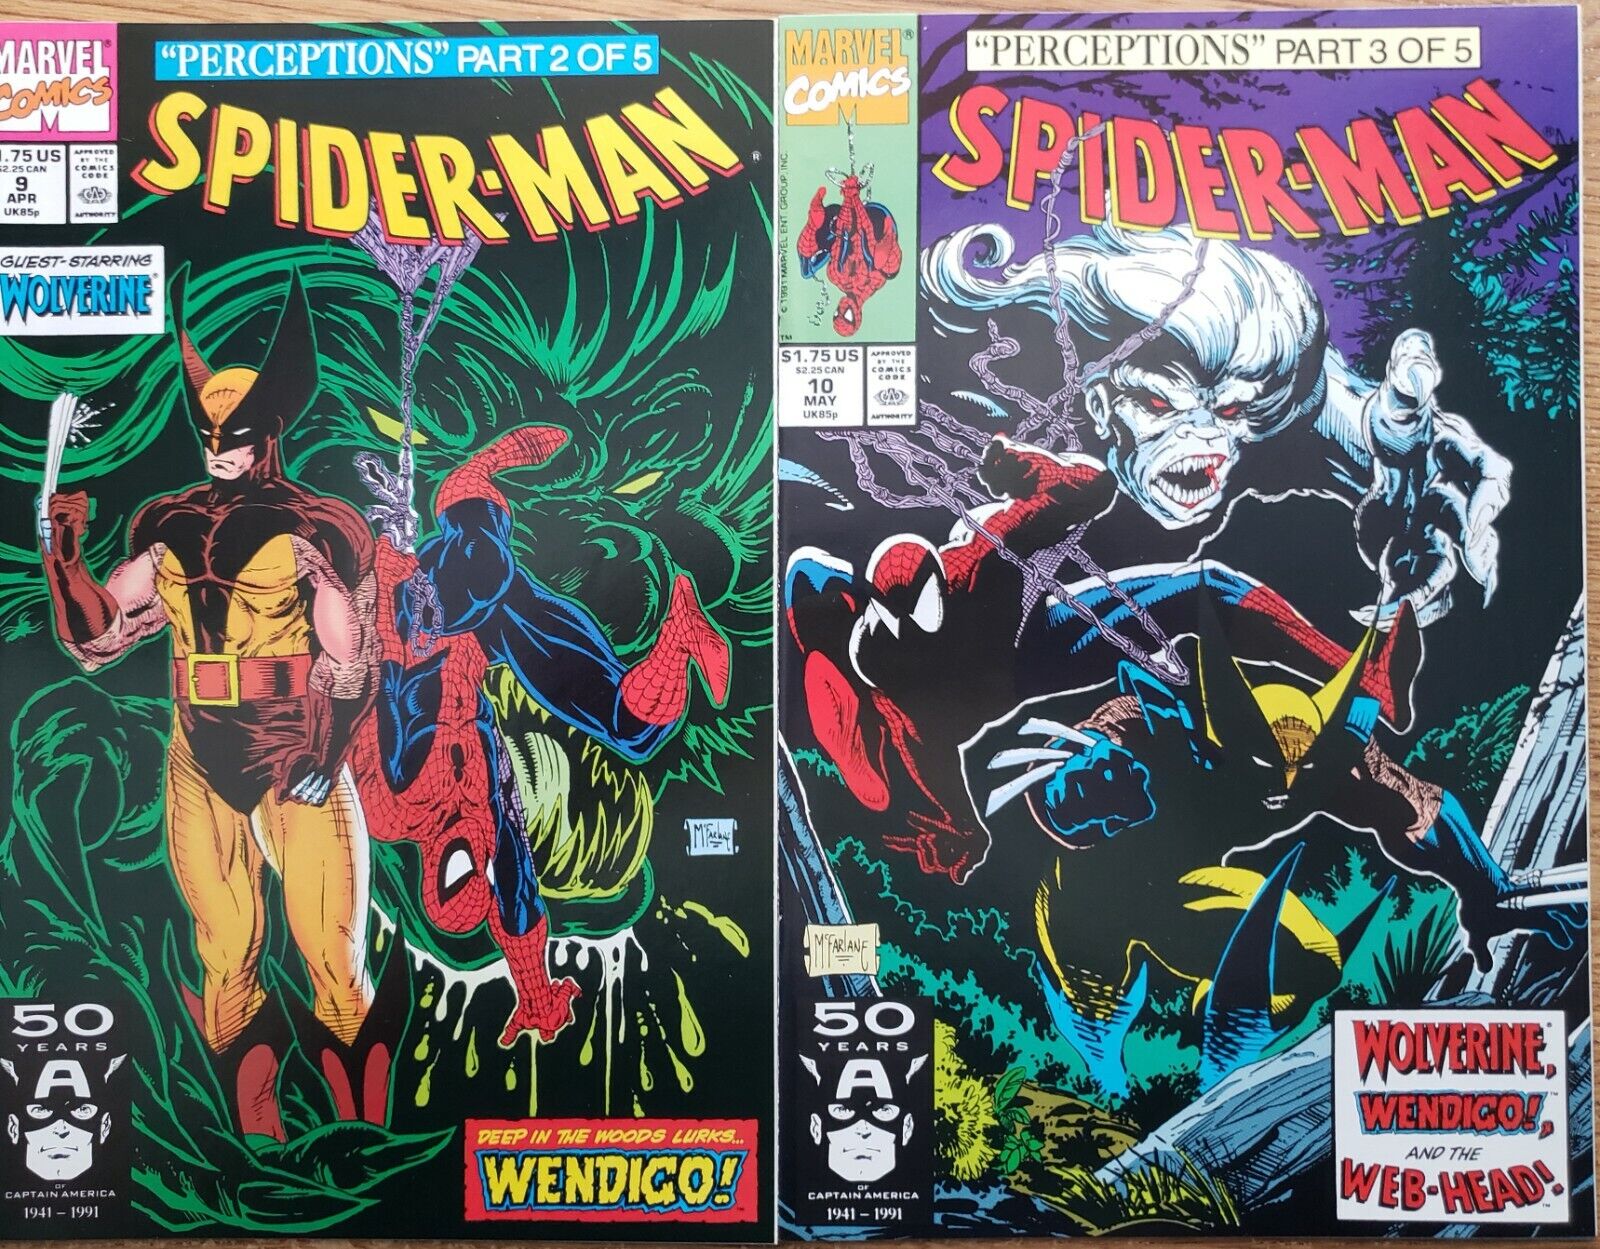 Spider-Man set of 2 #9 & #10 NM 9.6 (guest starring Wolverine) published 1991